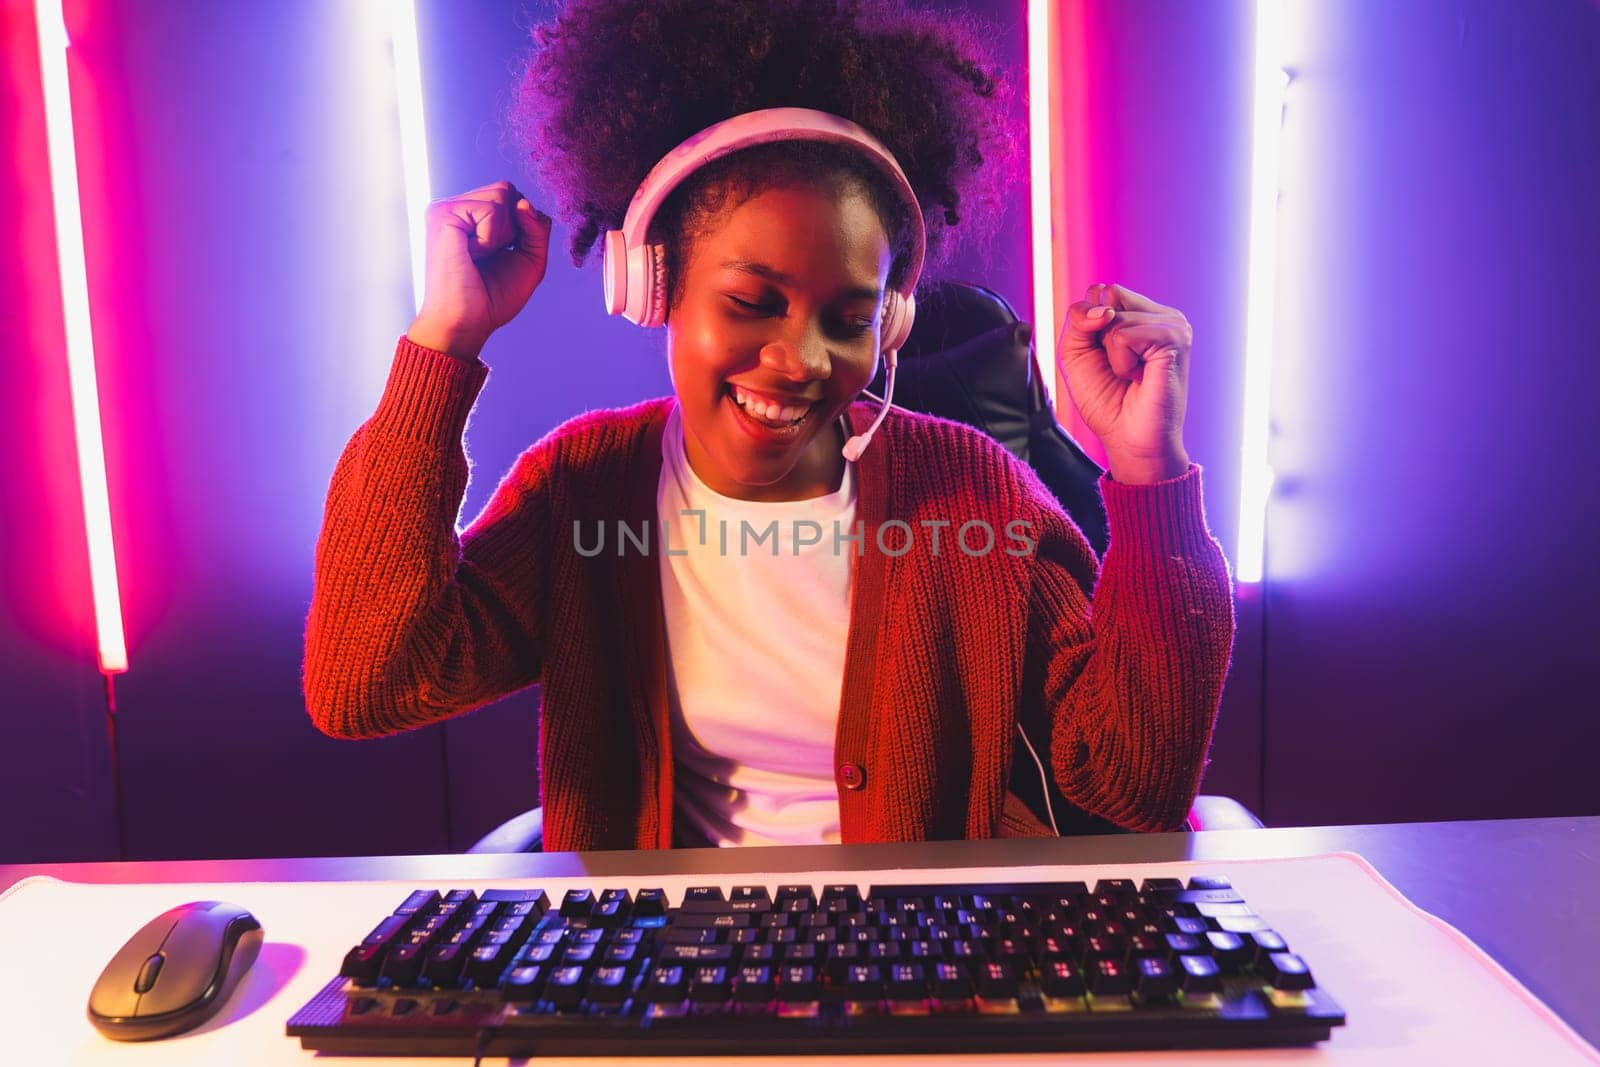 Gaming streamer, African girl playing online fighting with Esport skilled team wearing headphones in neon color lighting room. Talking other players planing strategies to win competitors. Tastemaker.